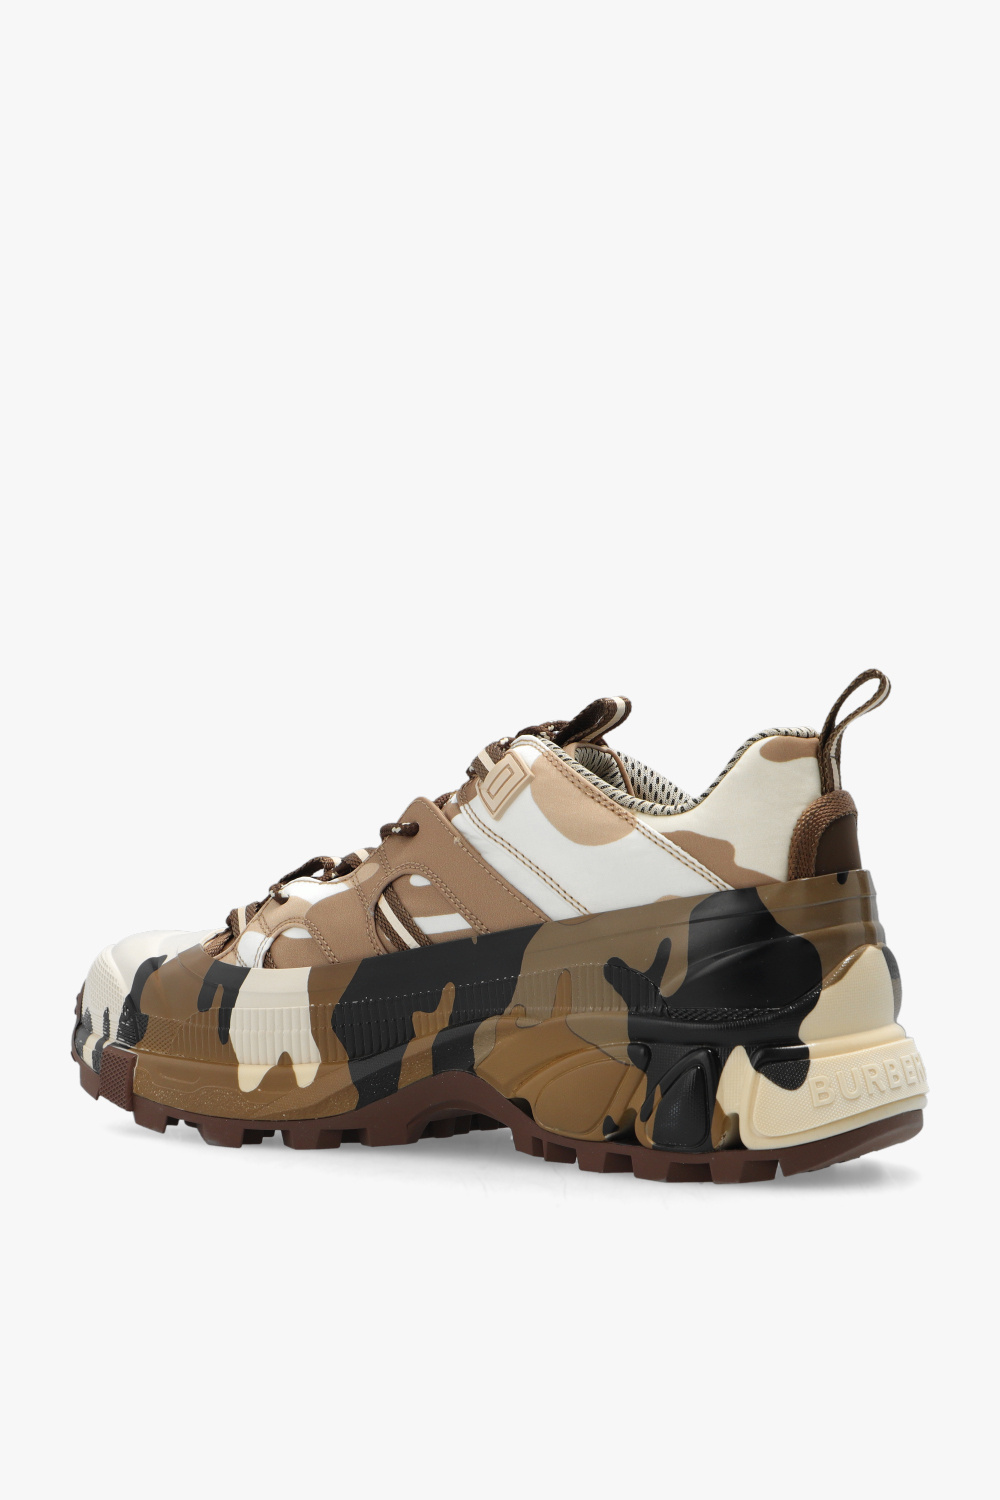 burberry with ‘Arthur’ sneakers